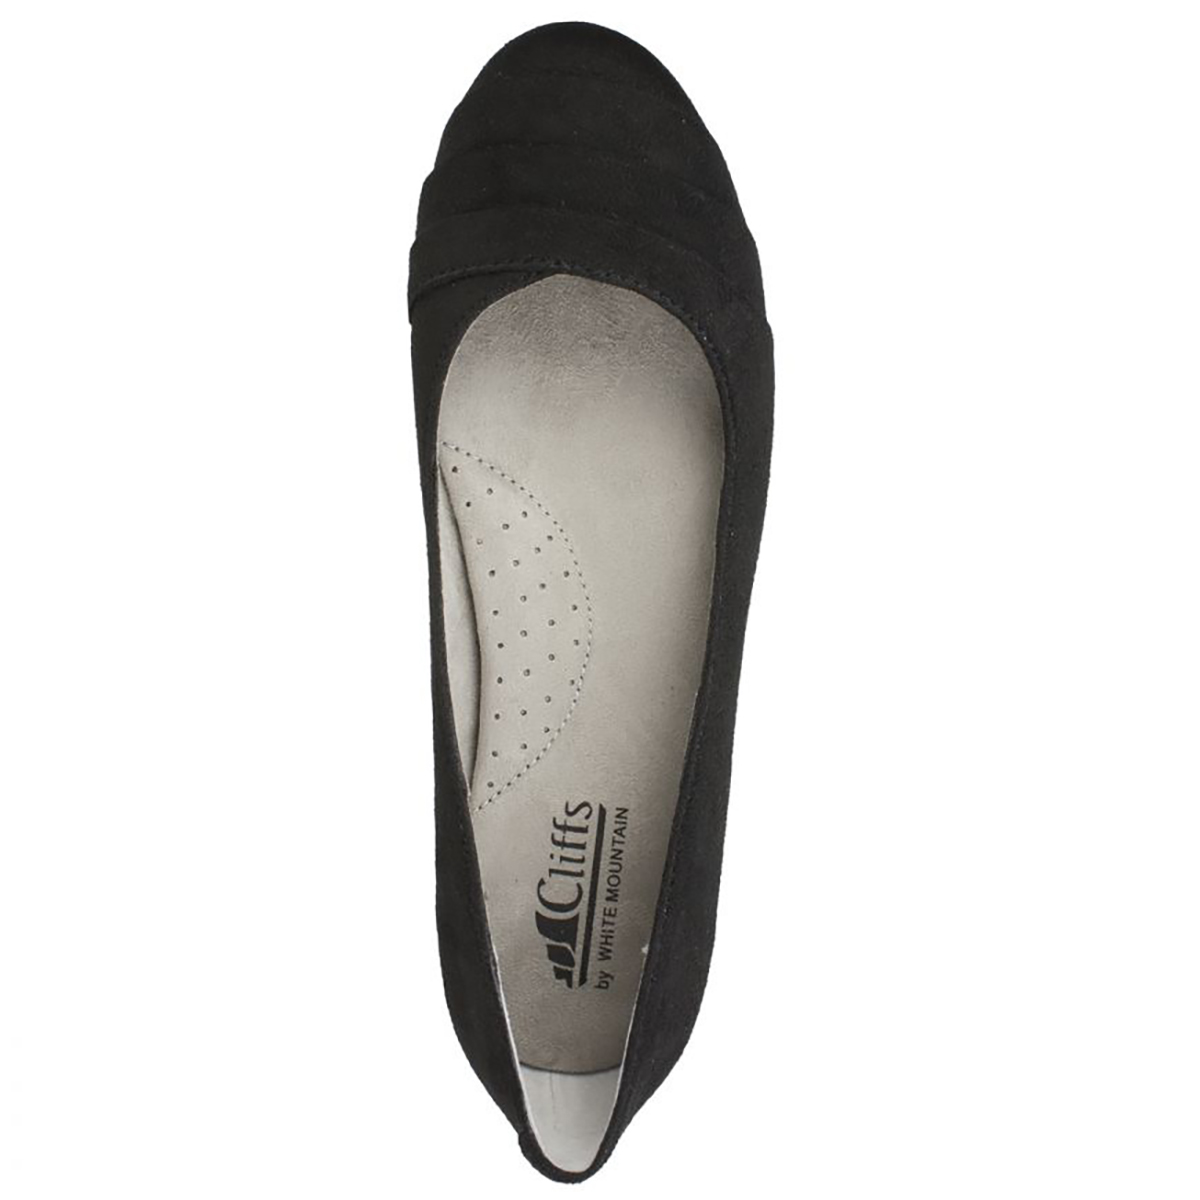 Womens Cliffs By White Mountain Clara Comfort Suede Flats